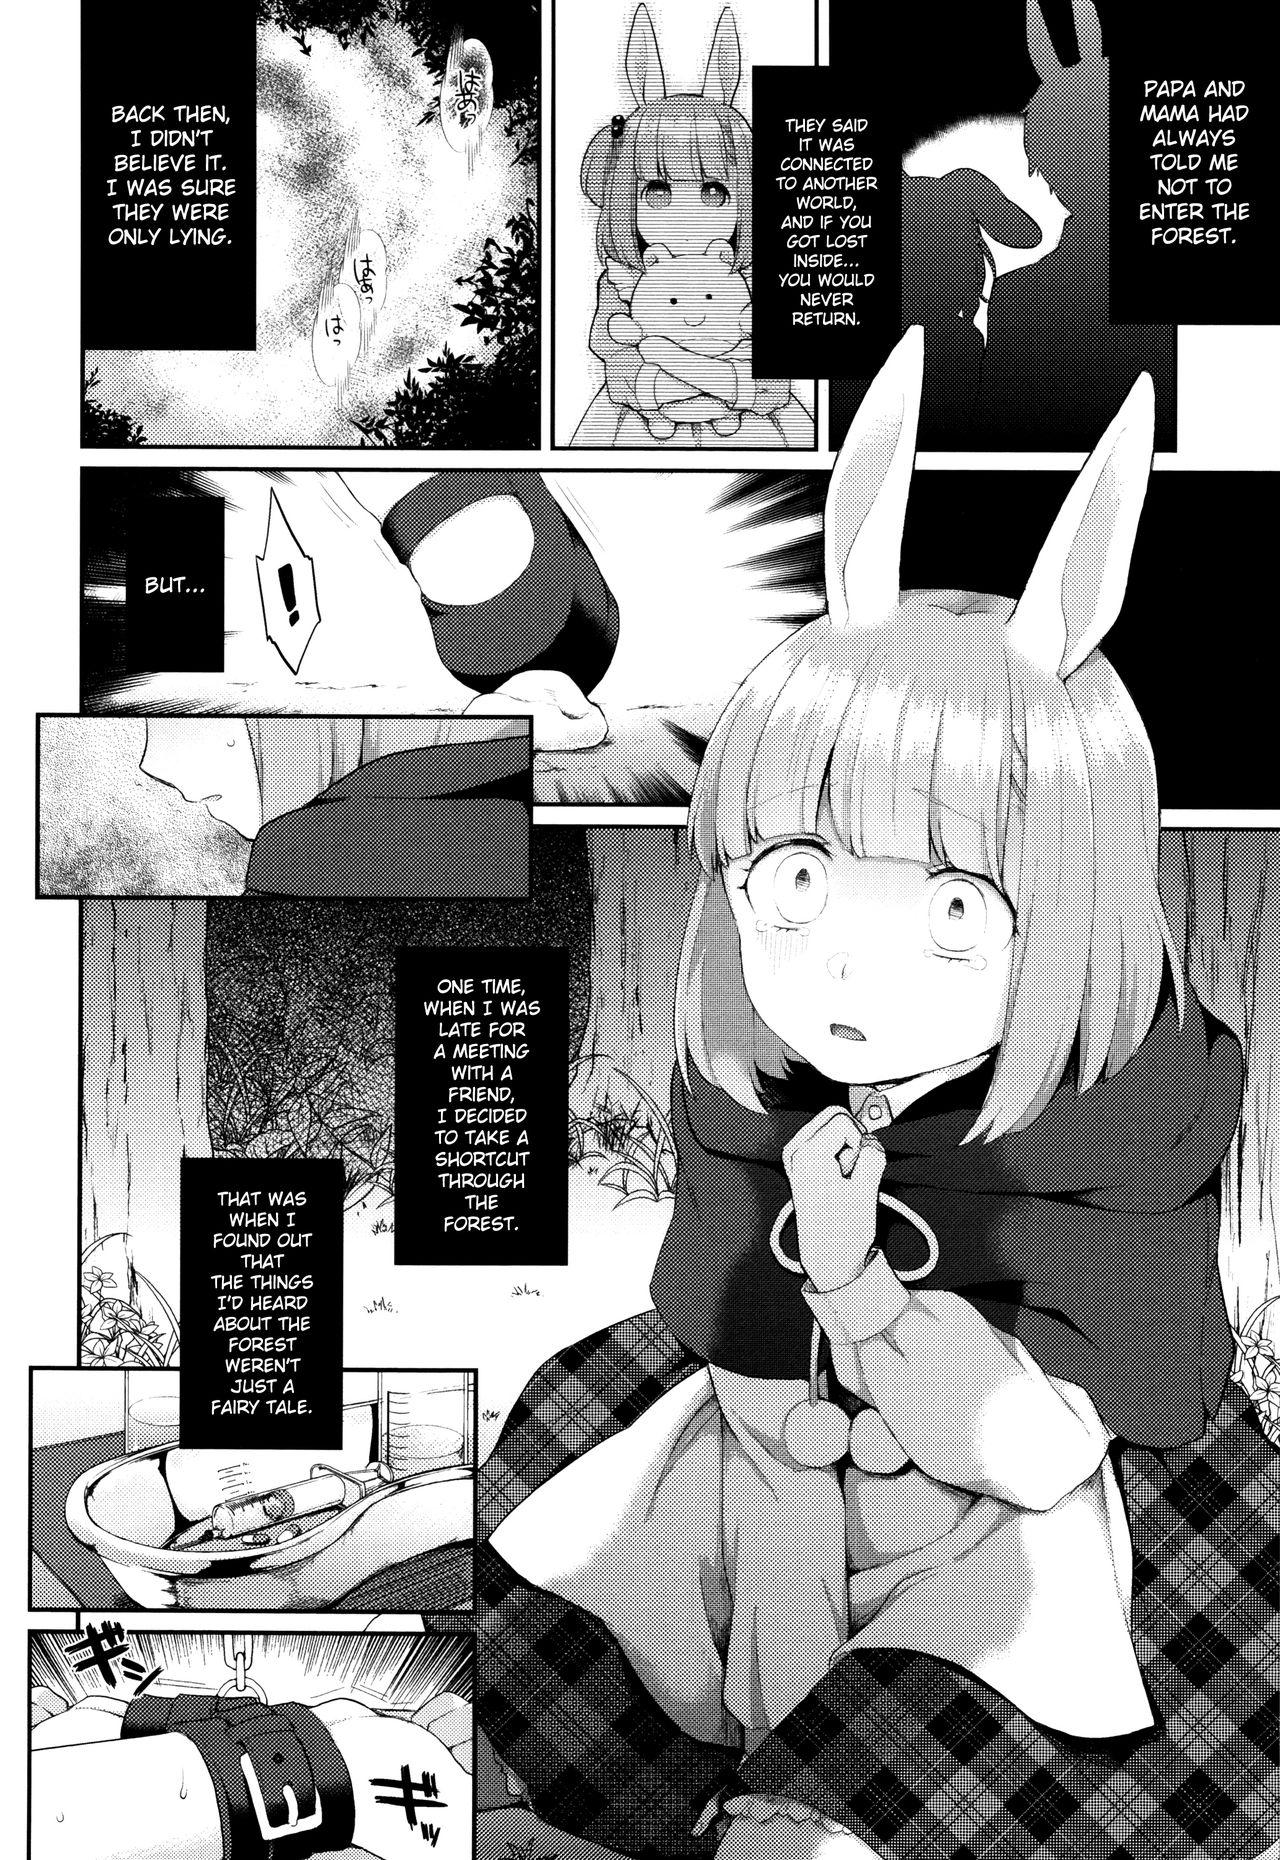 Daddy Rabbit Hole Clip - Page 2